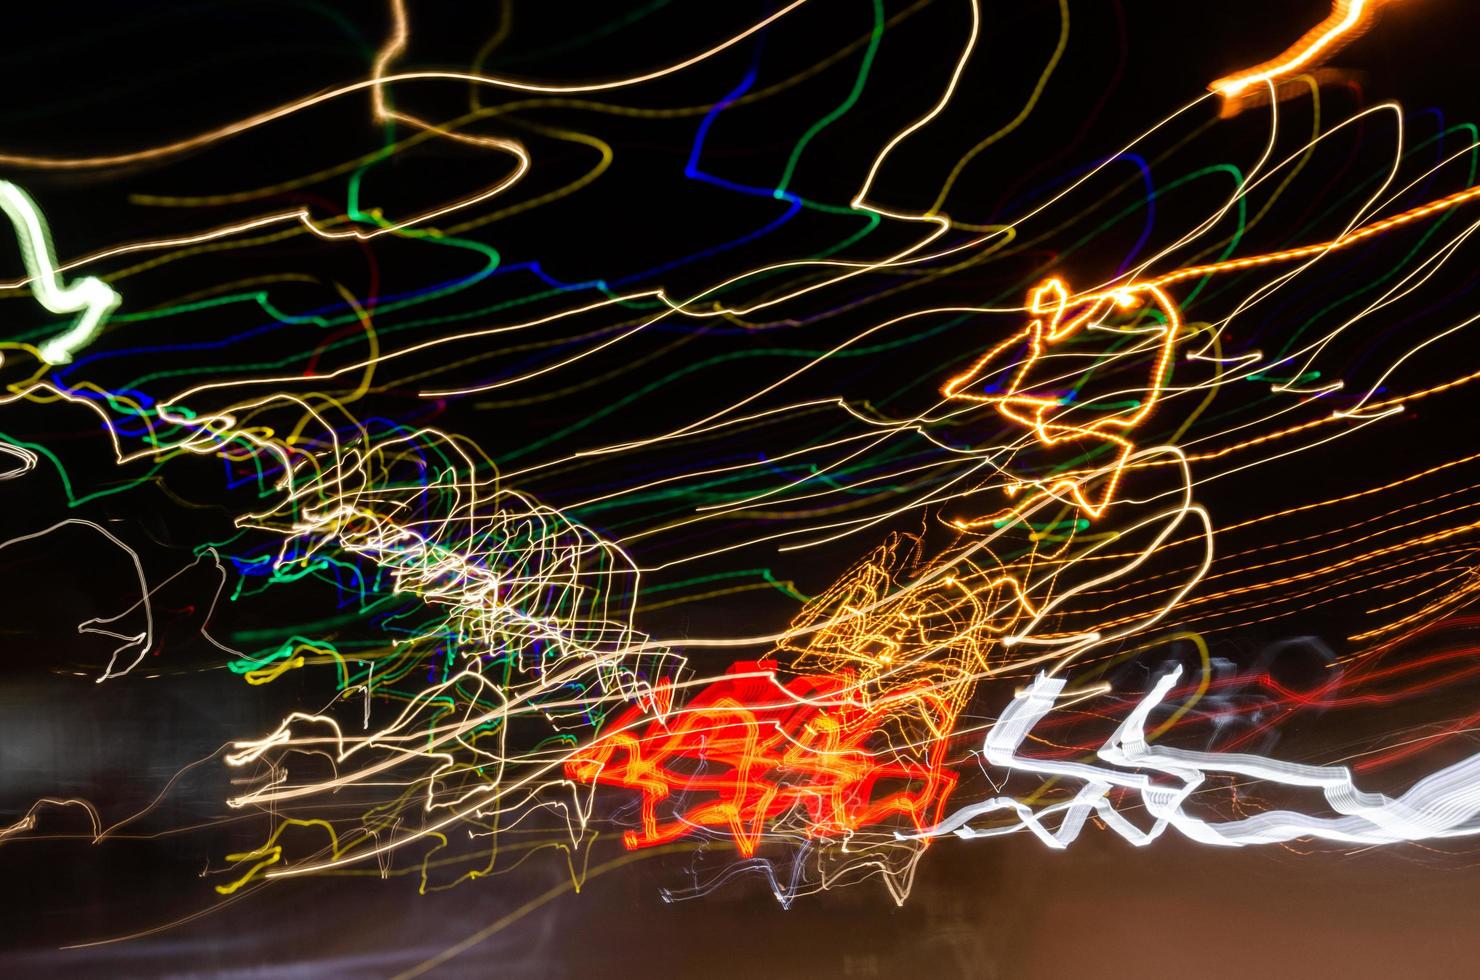 Painting with light photo